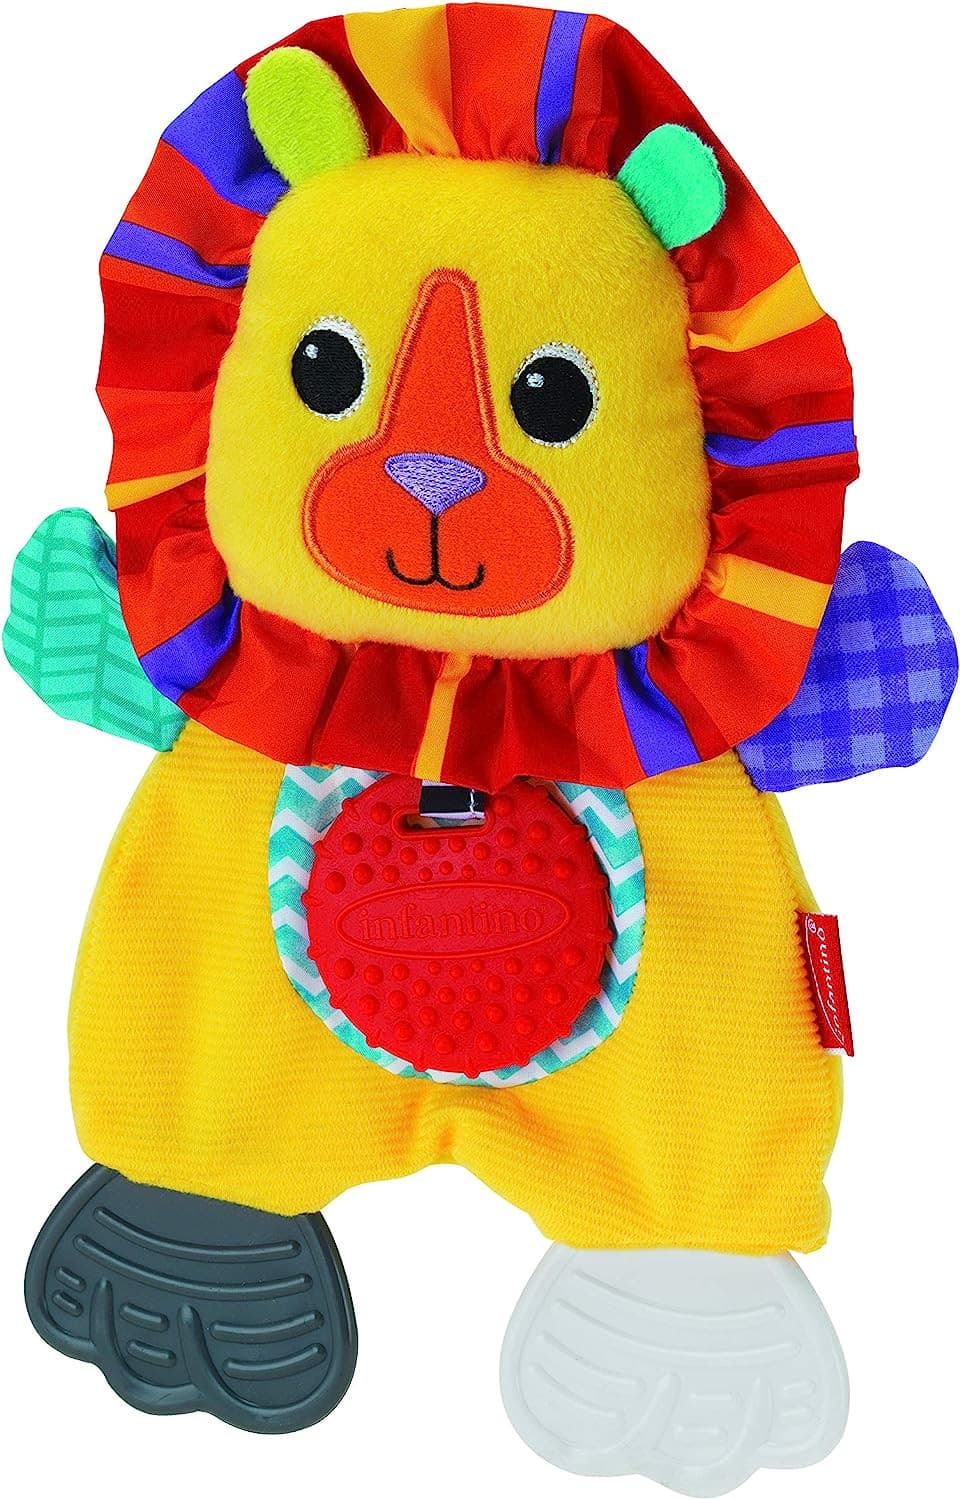 Infantino Cuddly Teether - Lion.